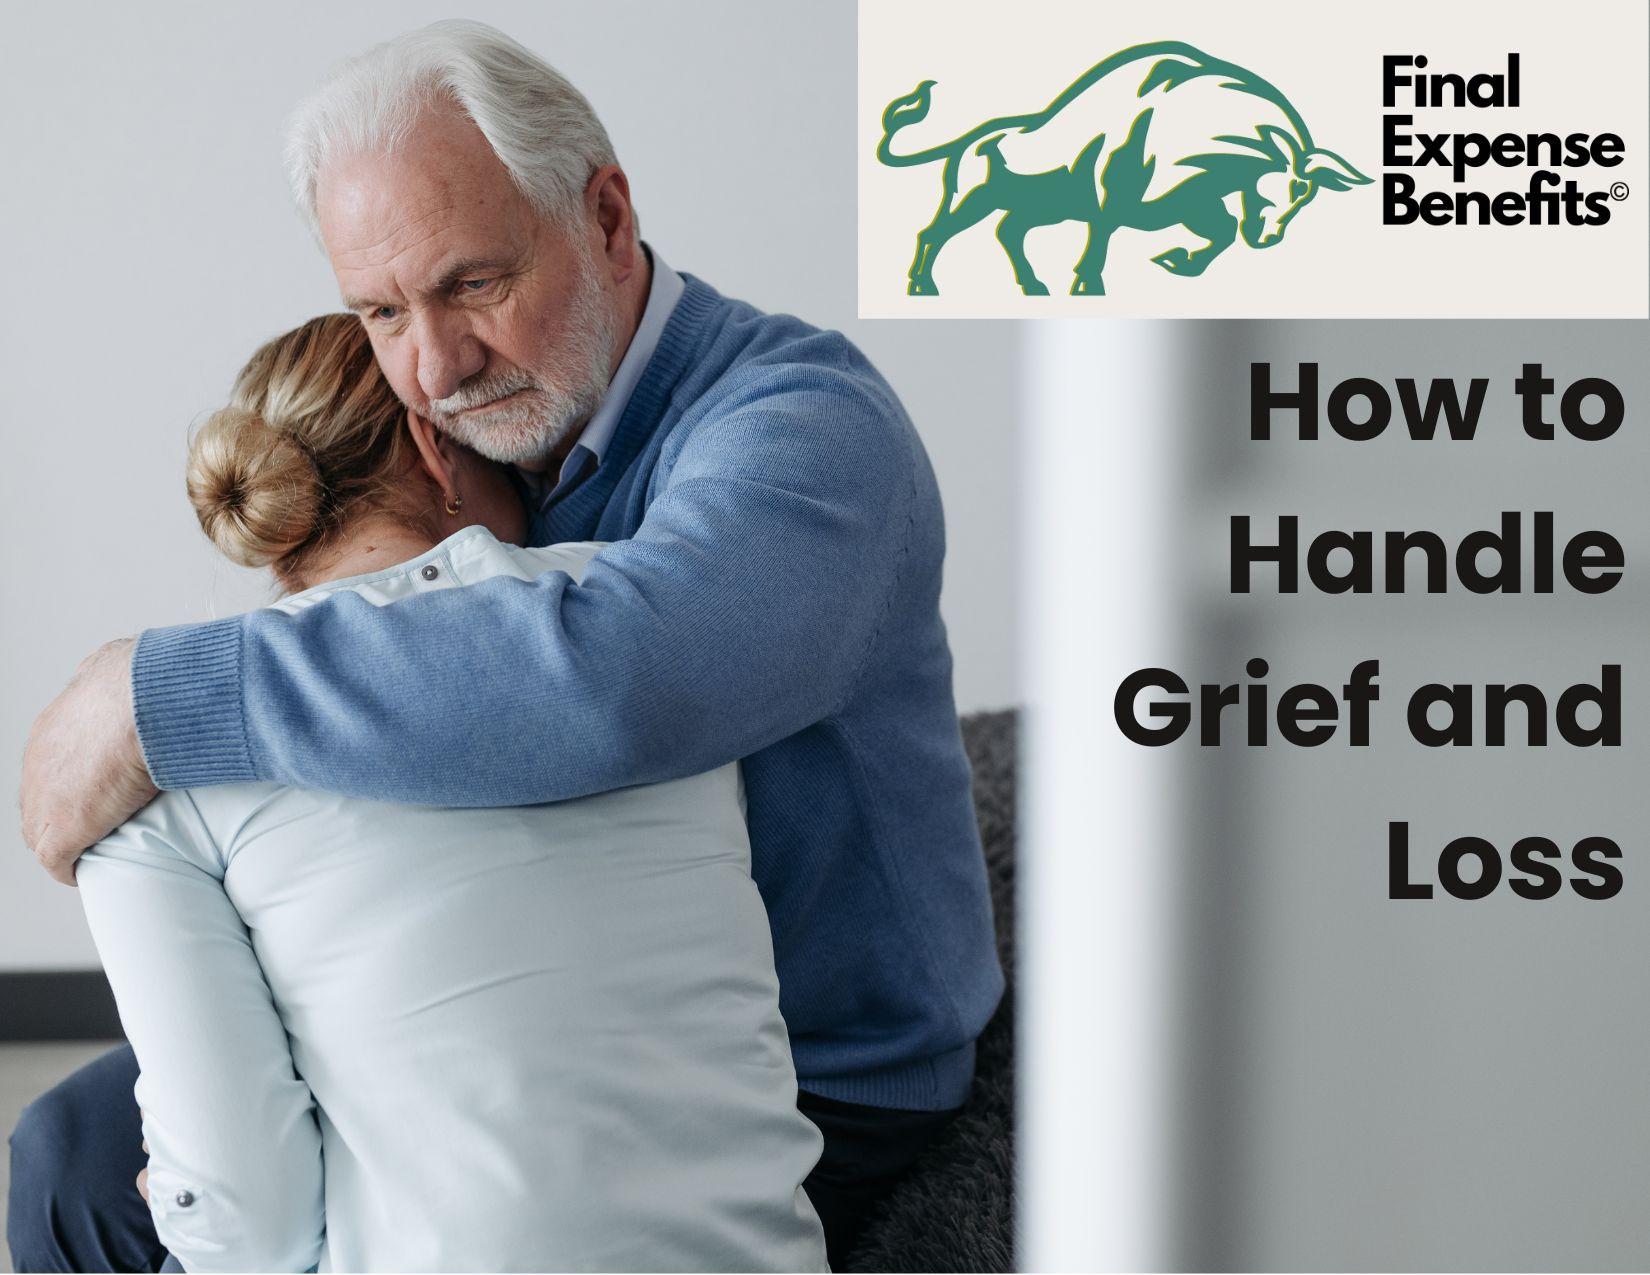 A man and a woman in an embrace. The man is hugging the woman, but the woman is burying her face in his shoulder. The Final Expense Benefits logo is on the top right with the words "How to Handle Grief and Loss" under the logo.